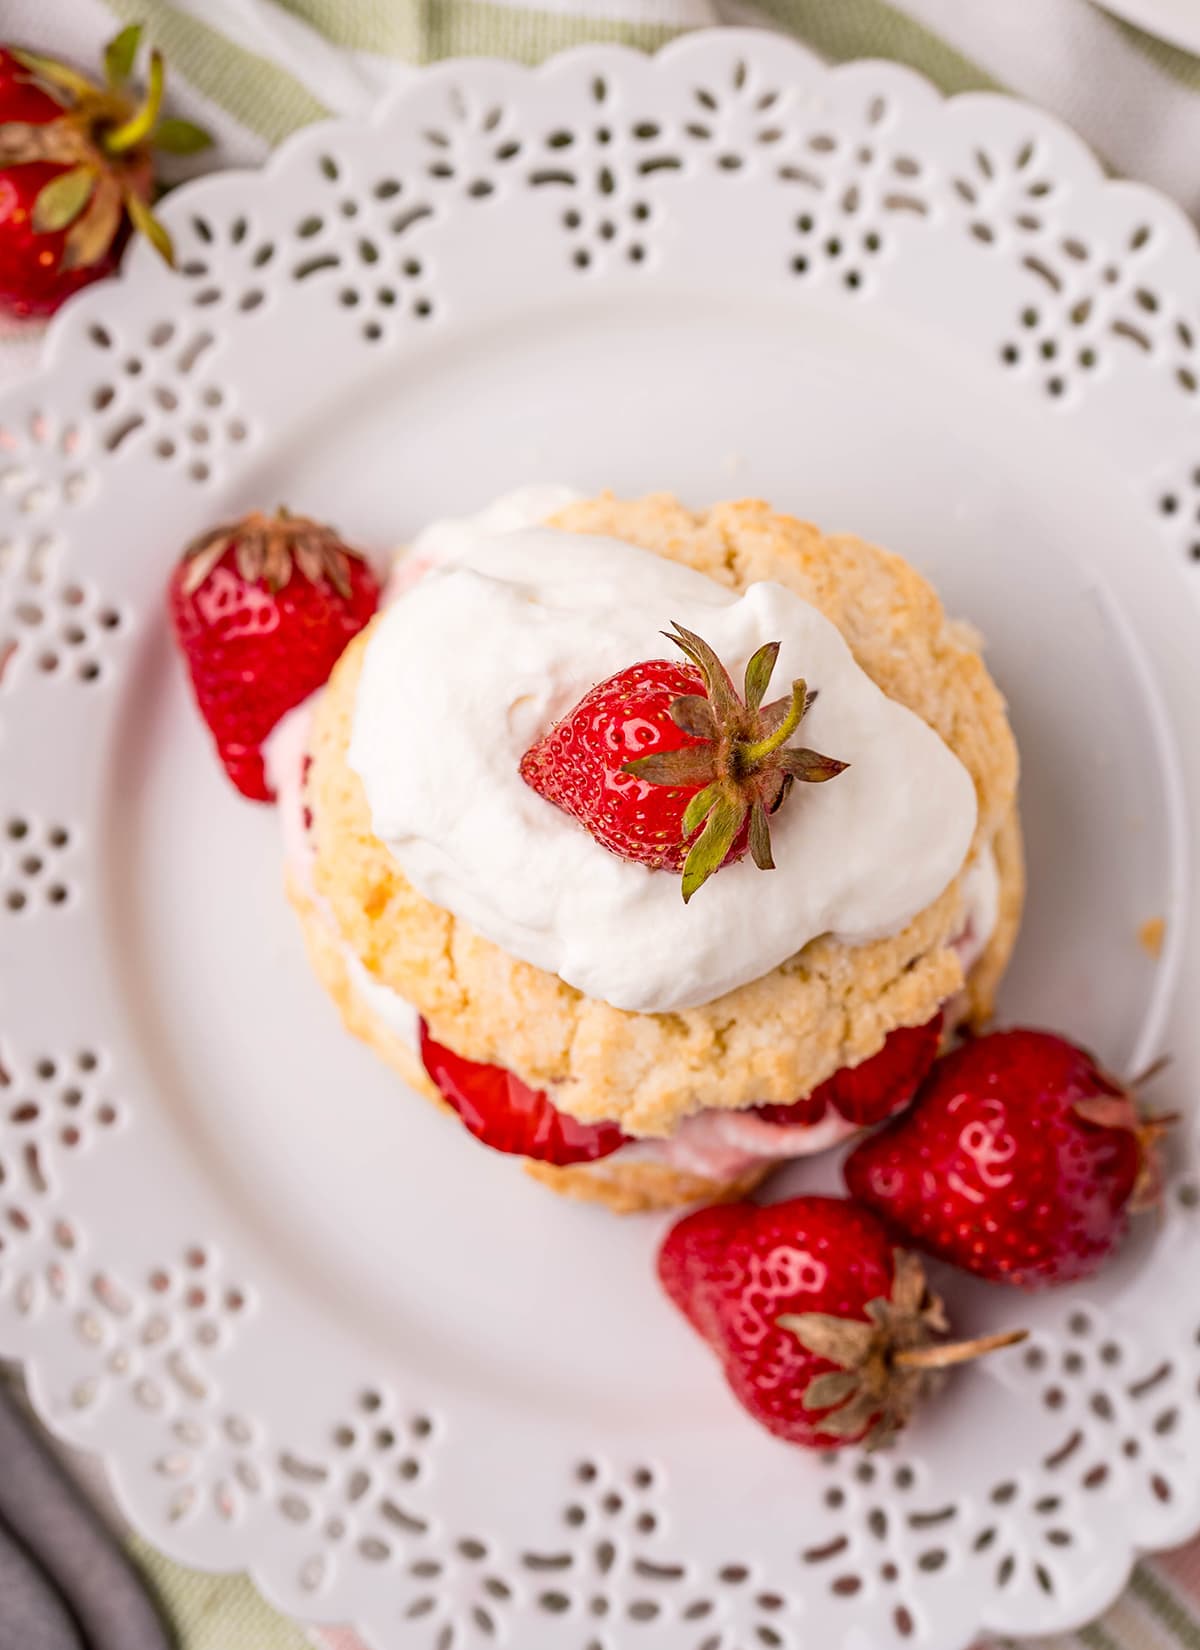 An overhead shot of a strawberry shortcake on a plate.